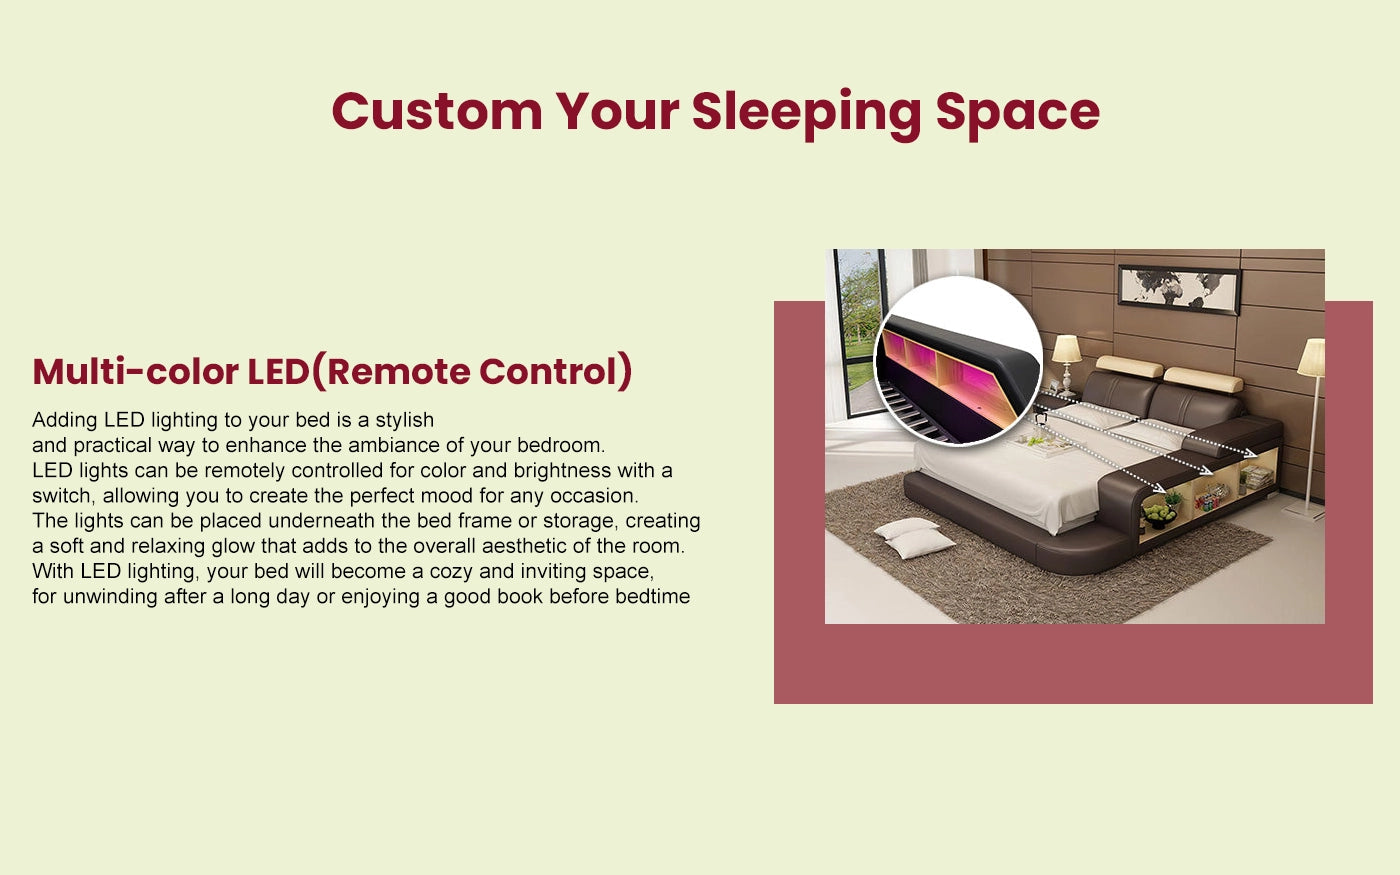 Hunky Modular Futuristic Multifunctional Smart Bed With Built in Massage Chair and Storage Space